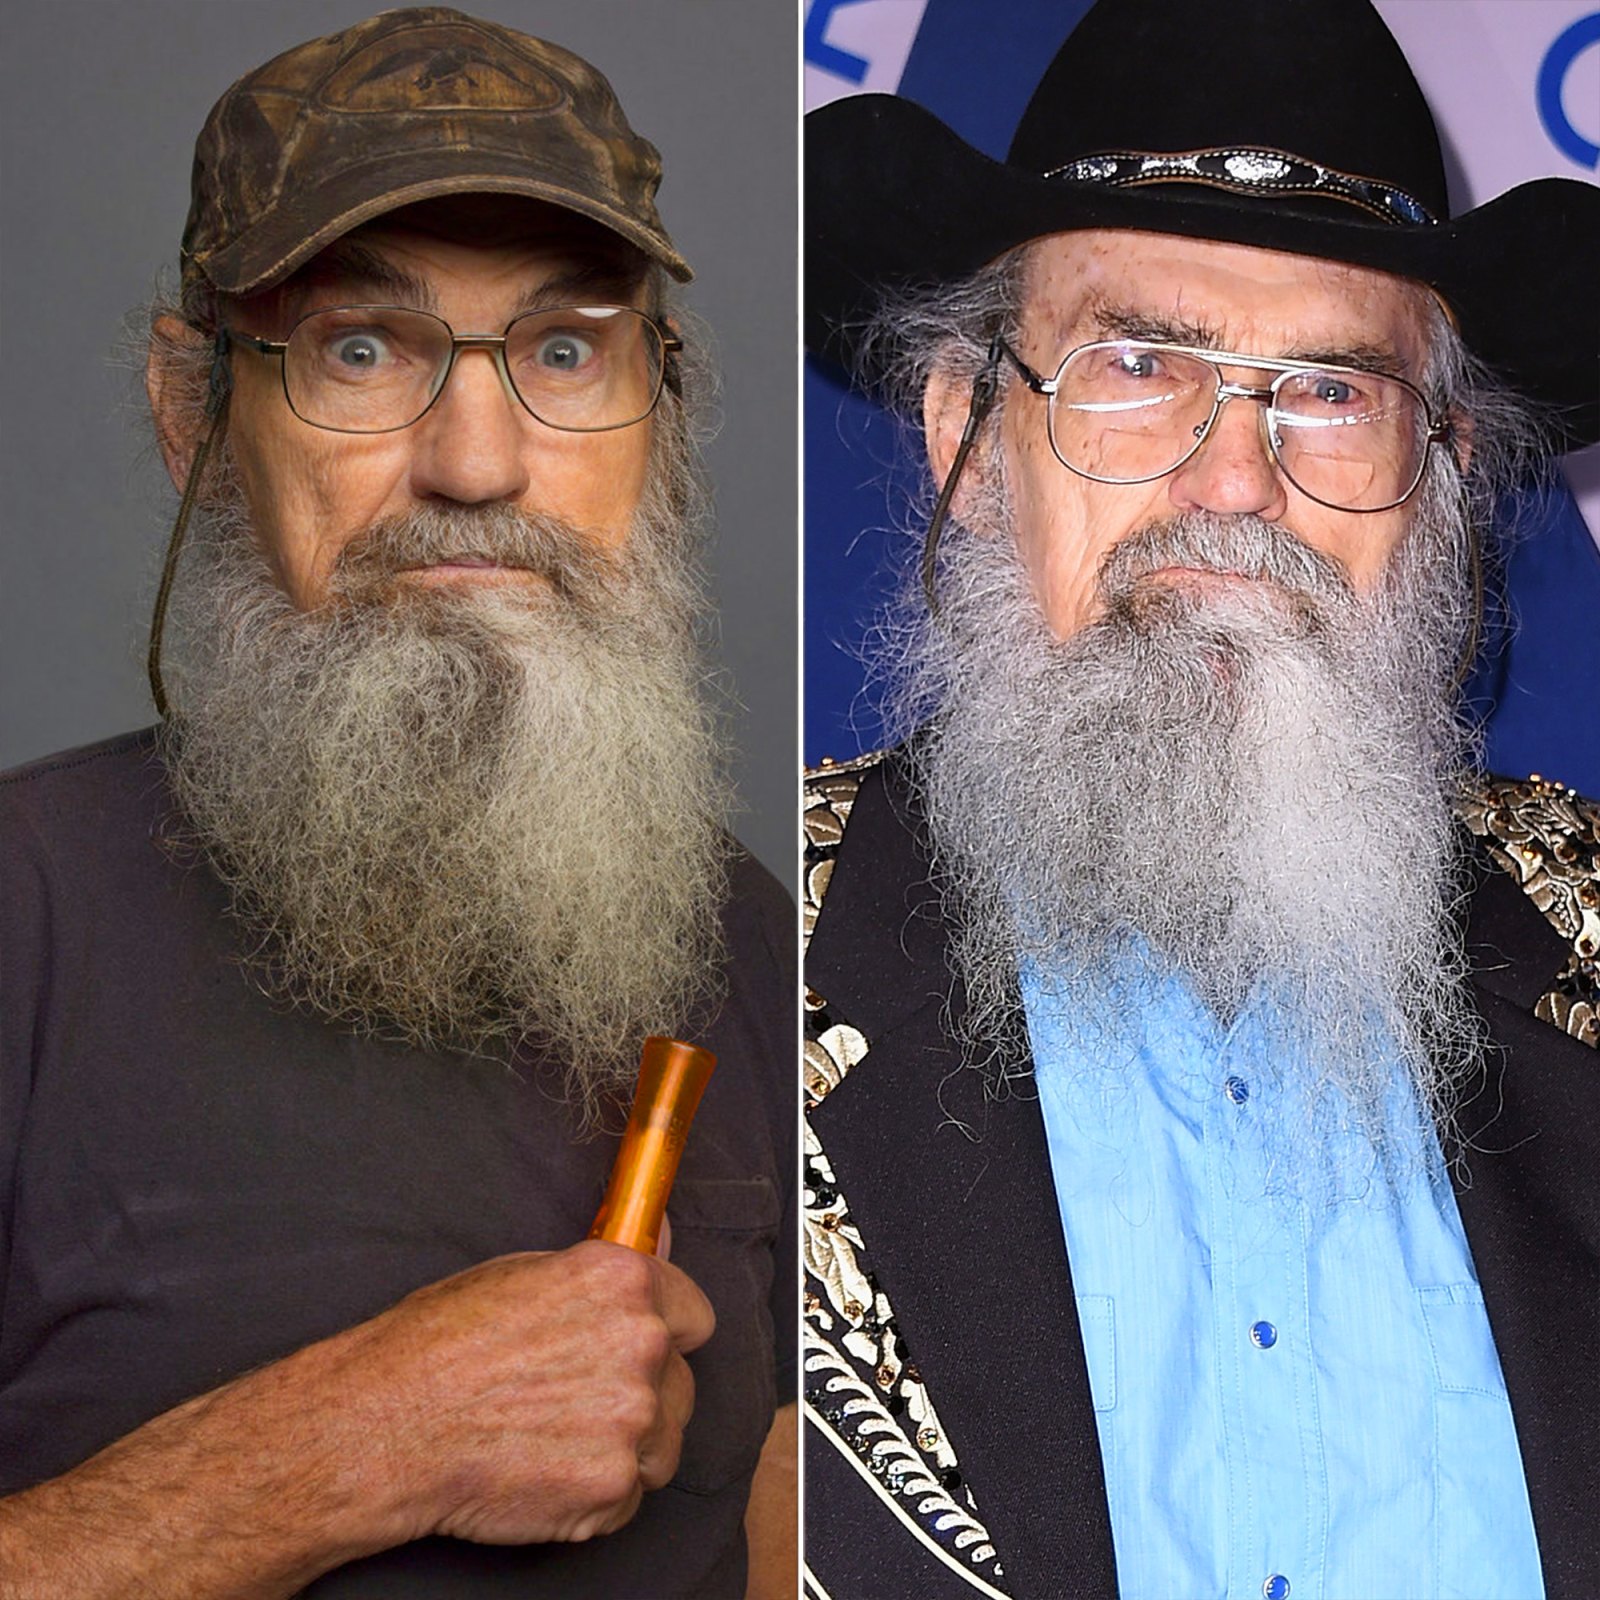 The Robertson Family of 'Duck Dynasty': Where Are They Now? 